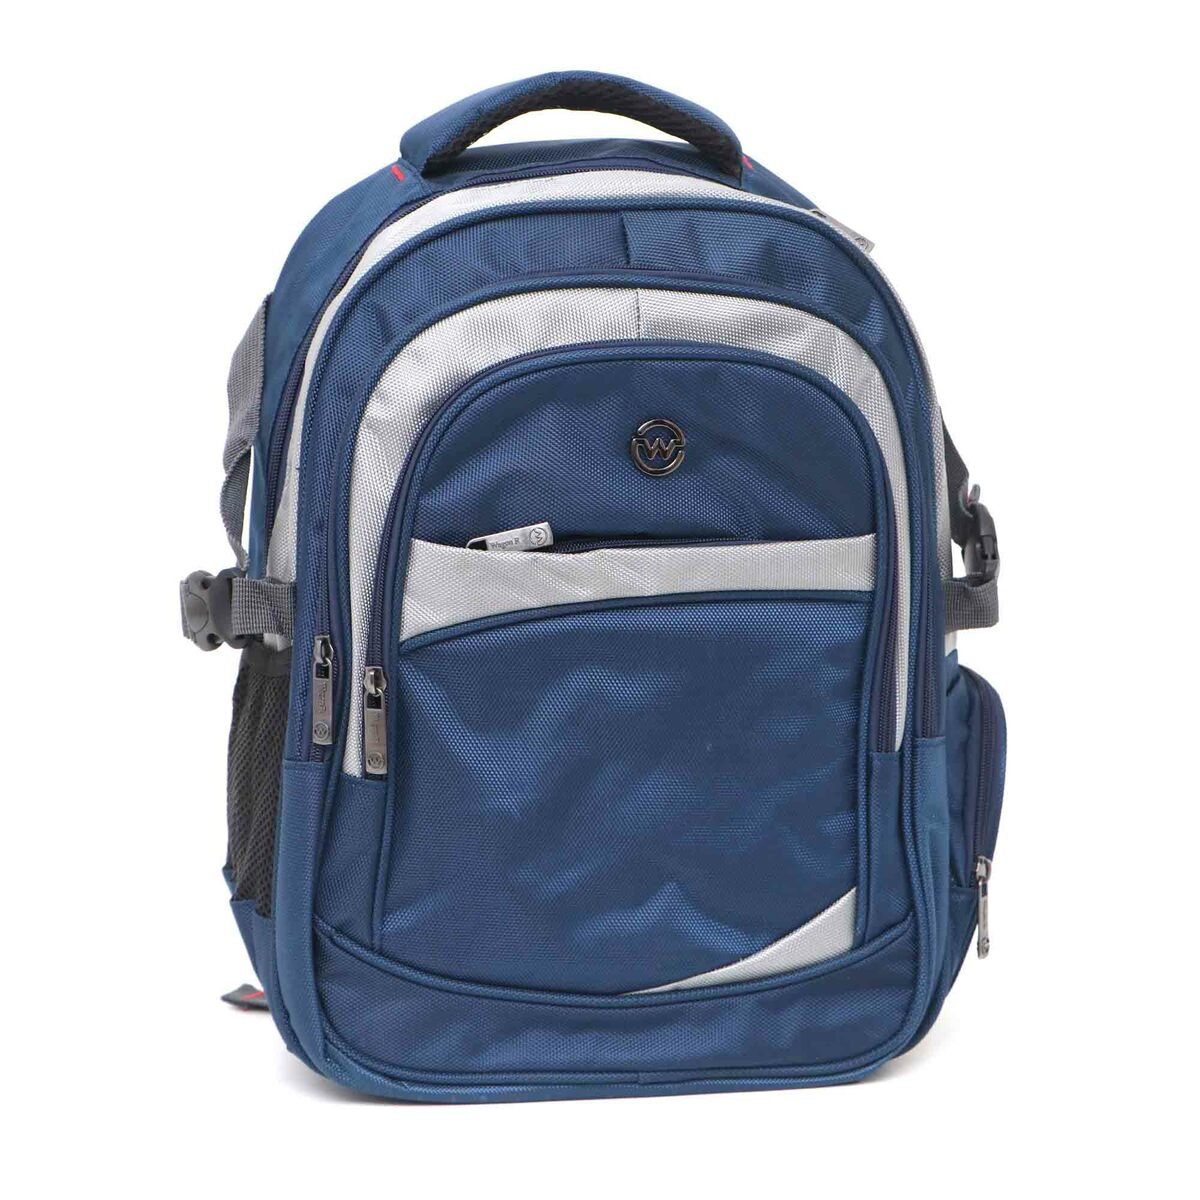 Wagon R Multi-Backpack 7805-S 16''